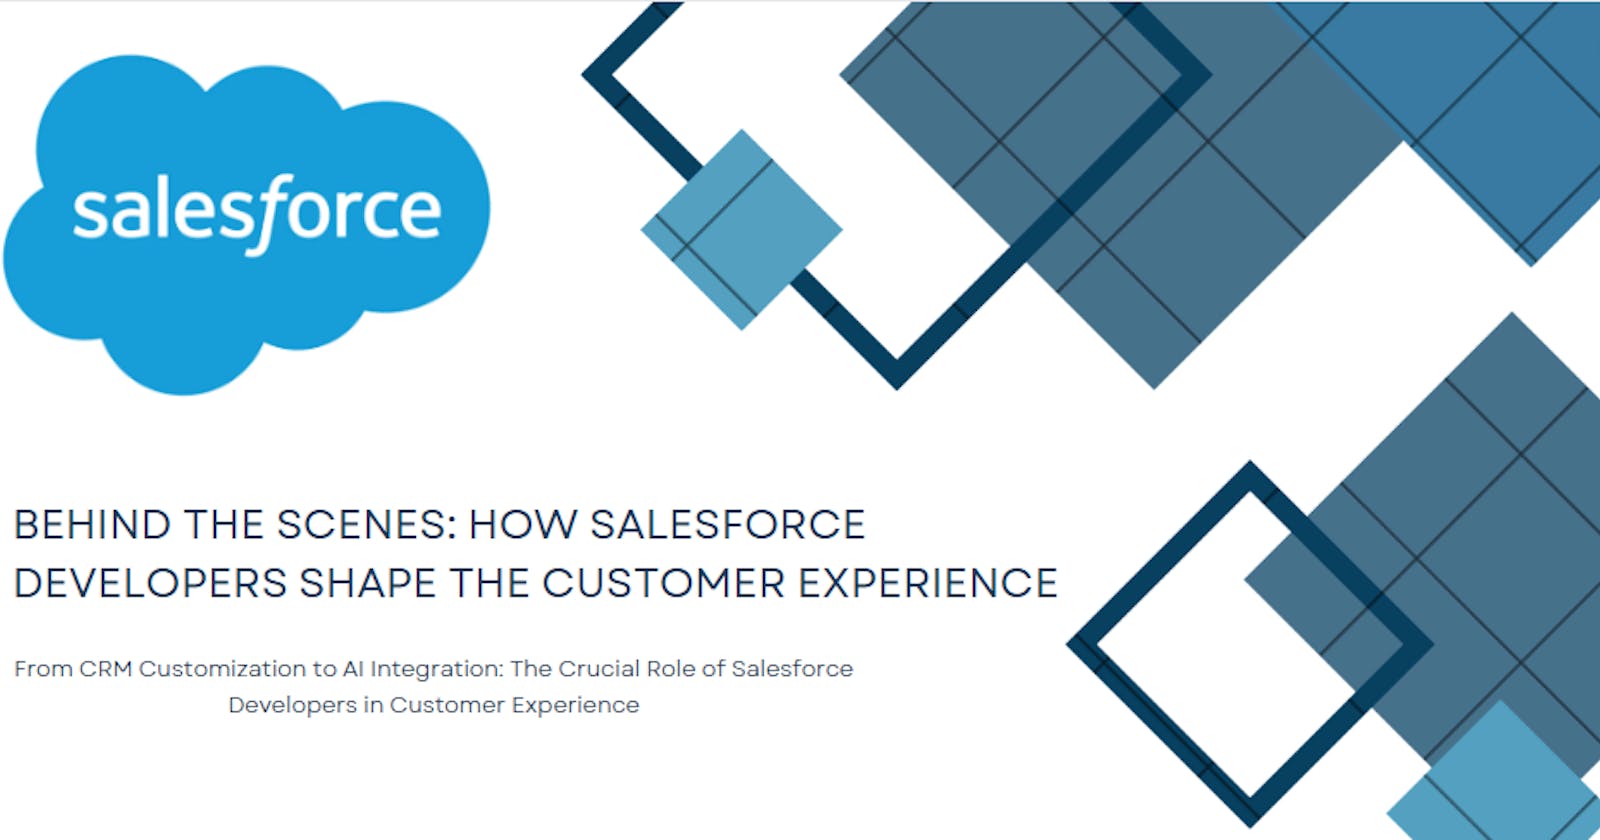 Behind the Scenes: How Salesforce Developers Shape the Customer Experience